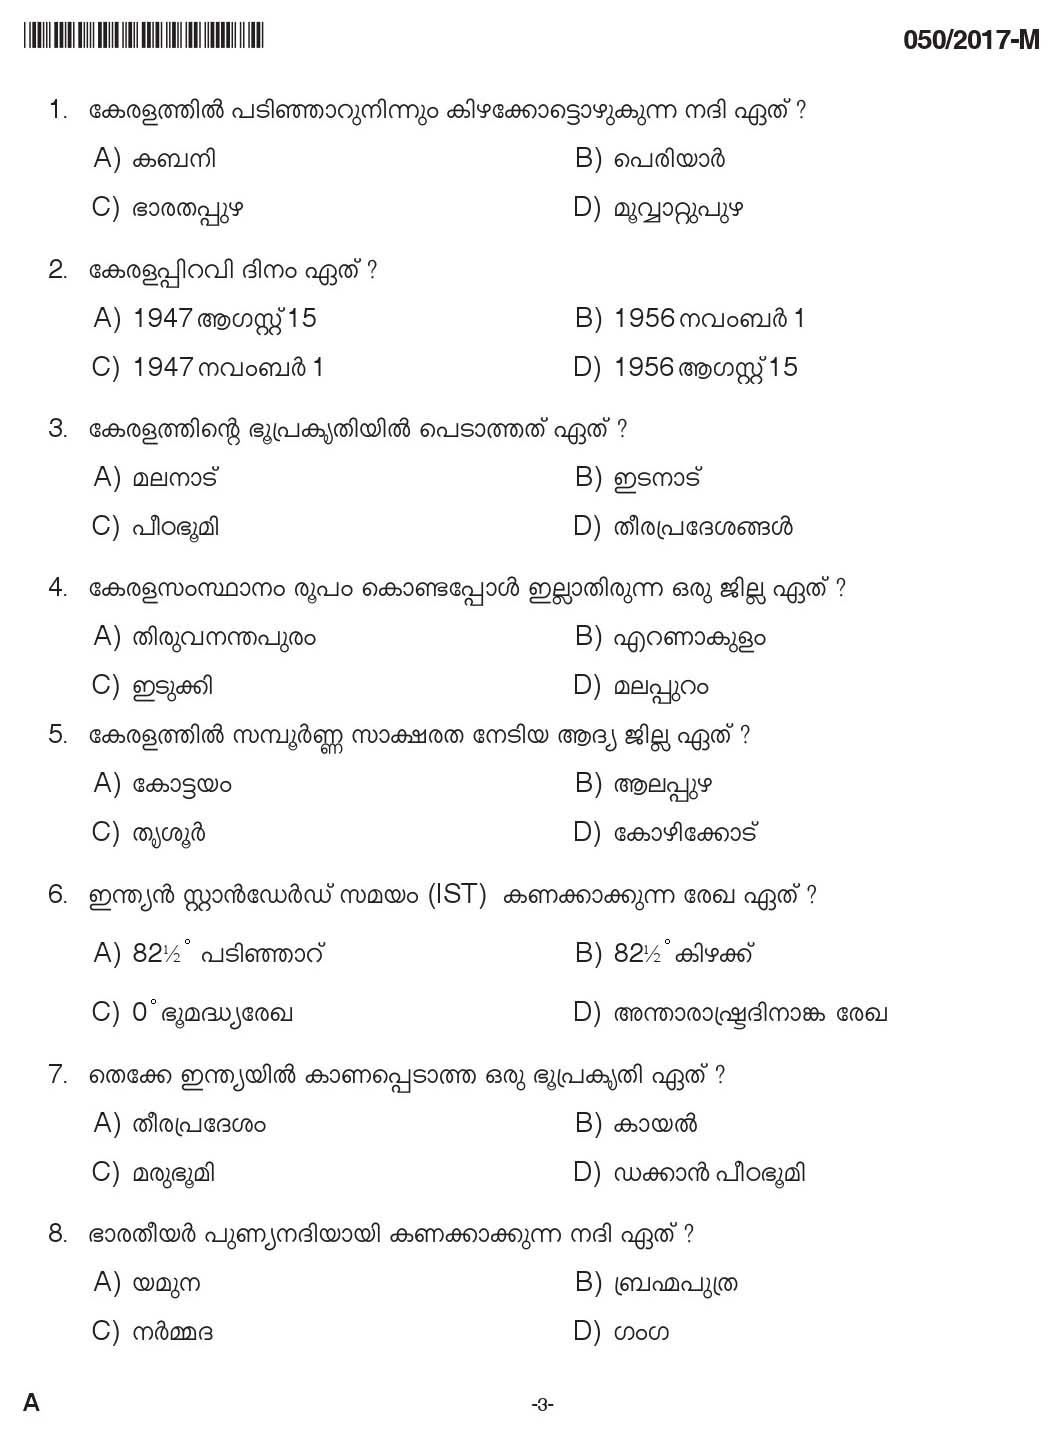 LD Clerk Question Paper 2017 Malayalam Paper Code 0502017 M 2